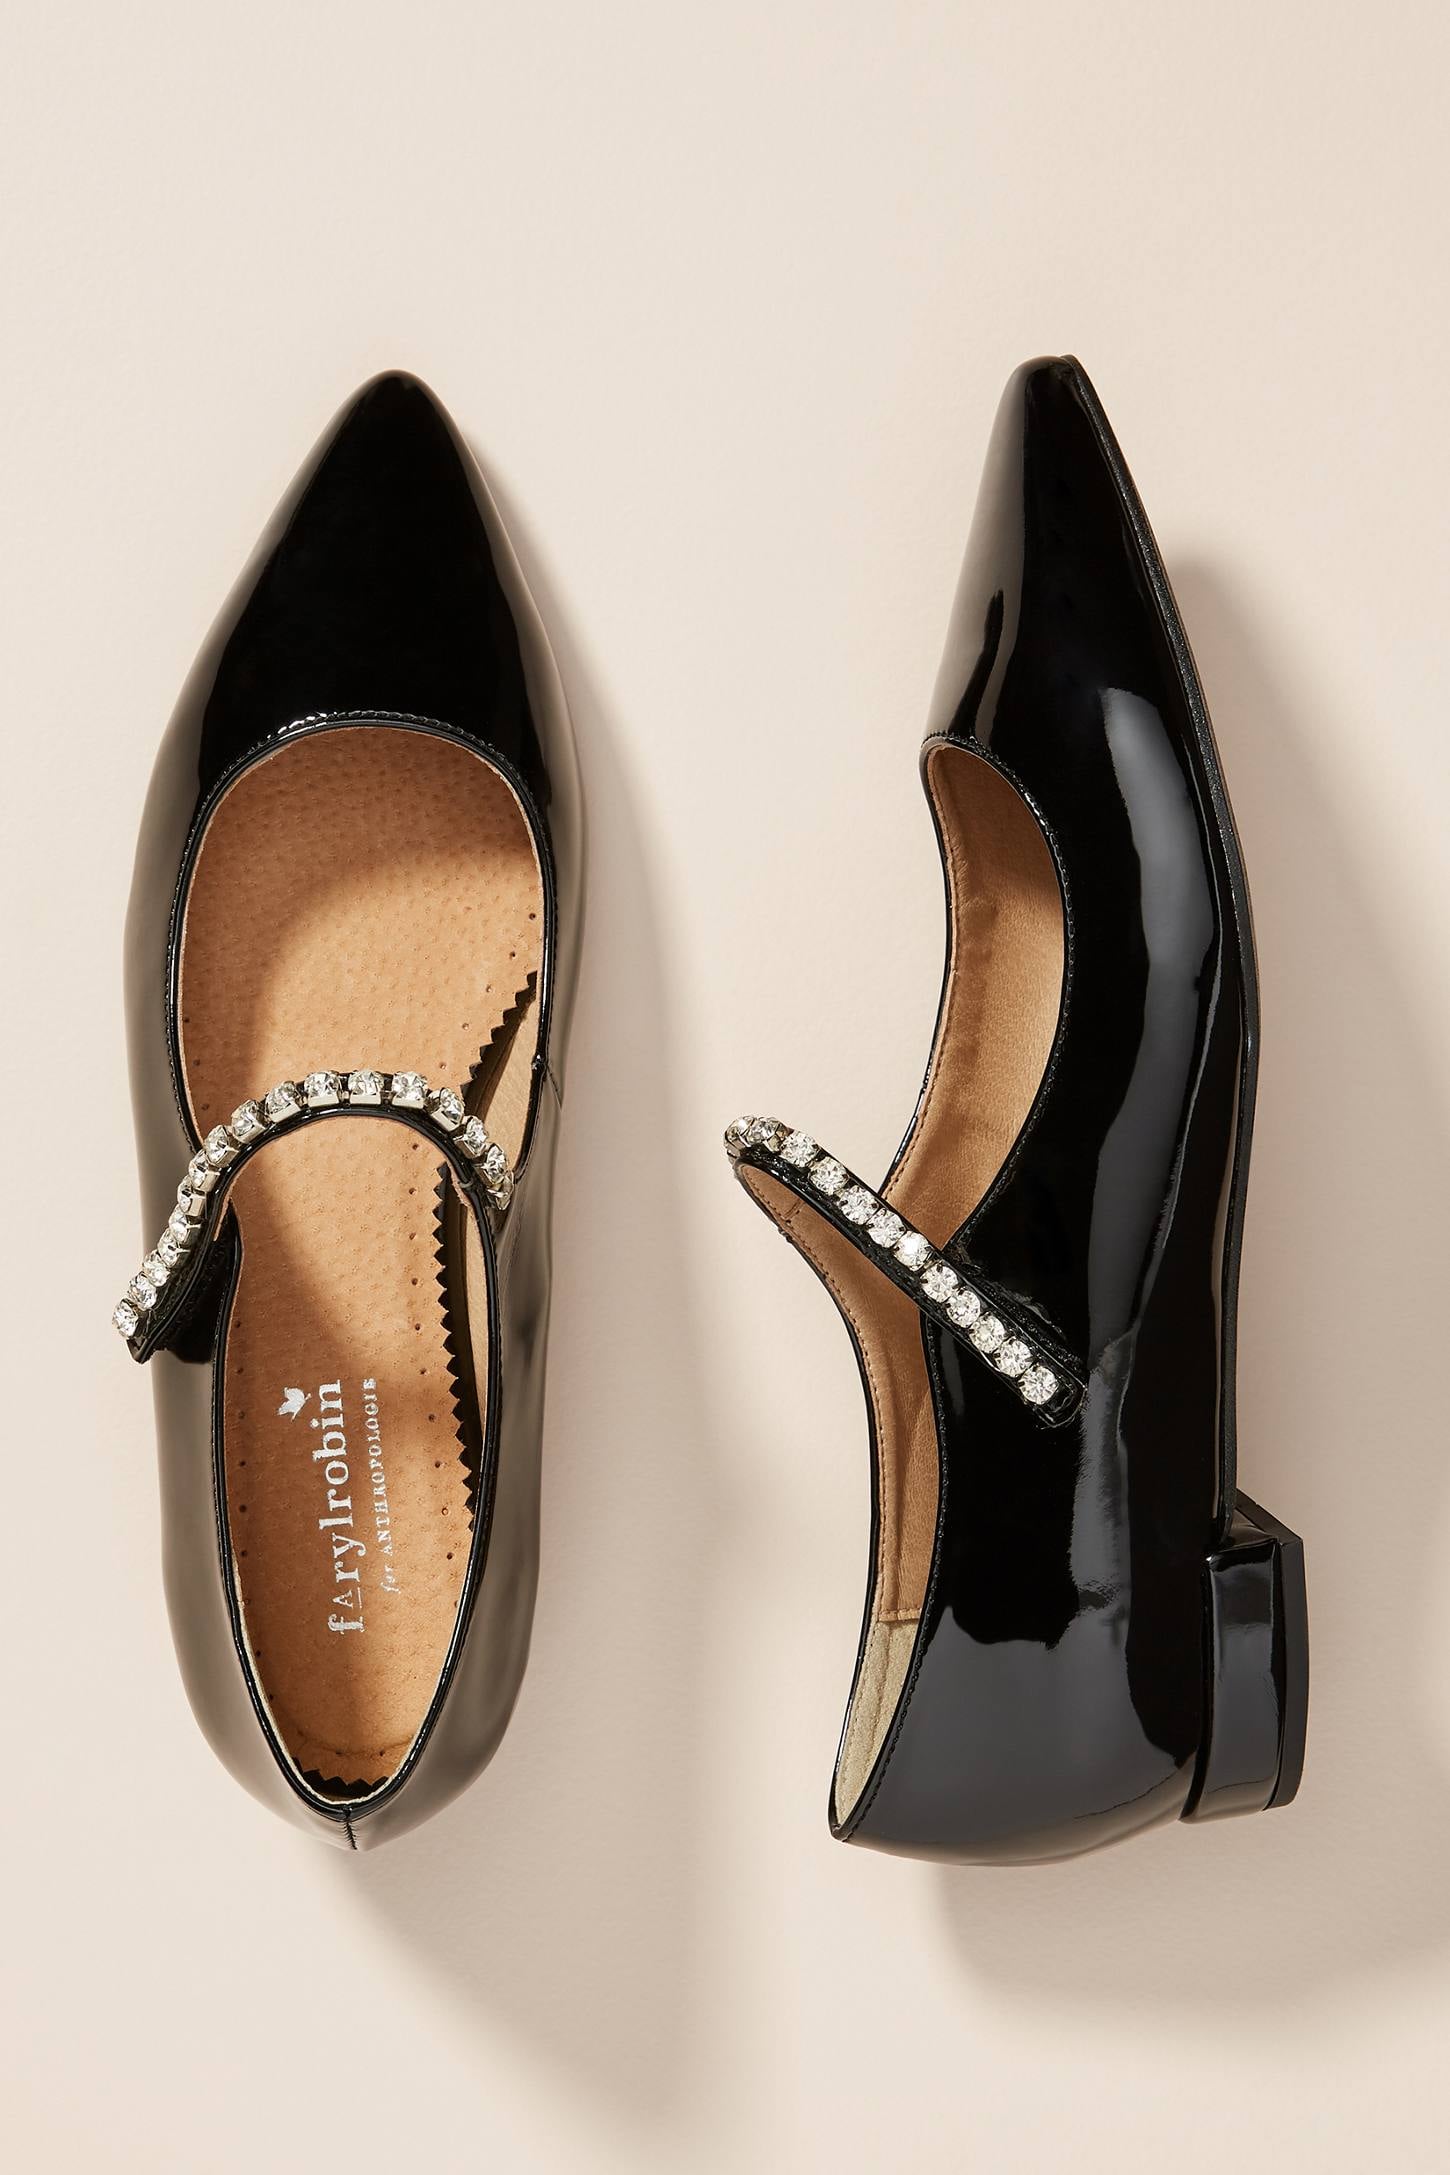 anthropologie women's shoes